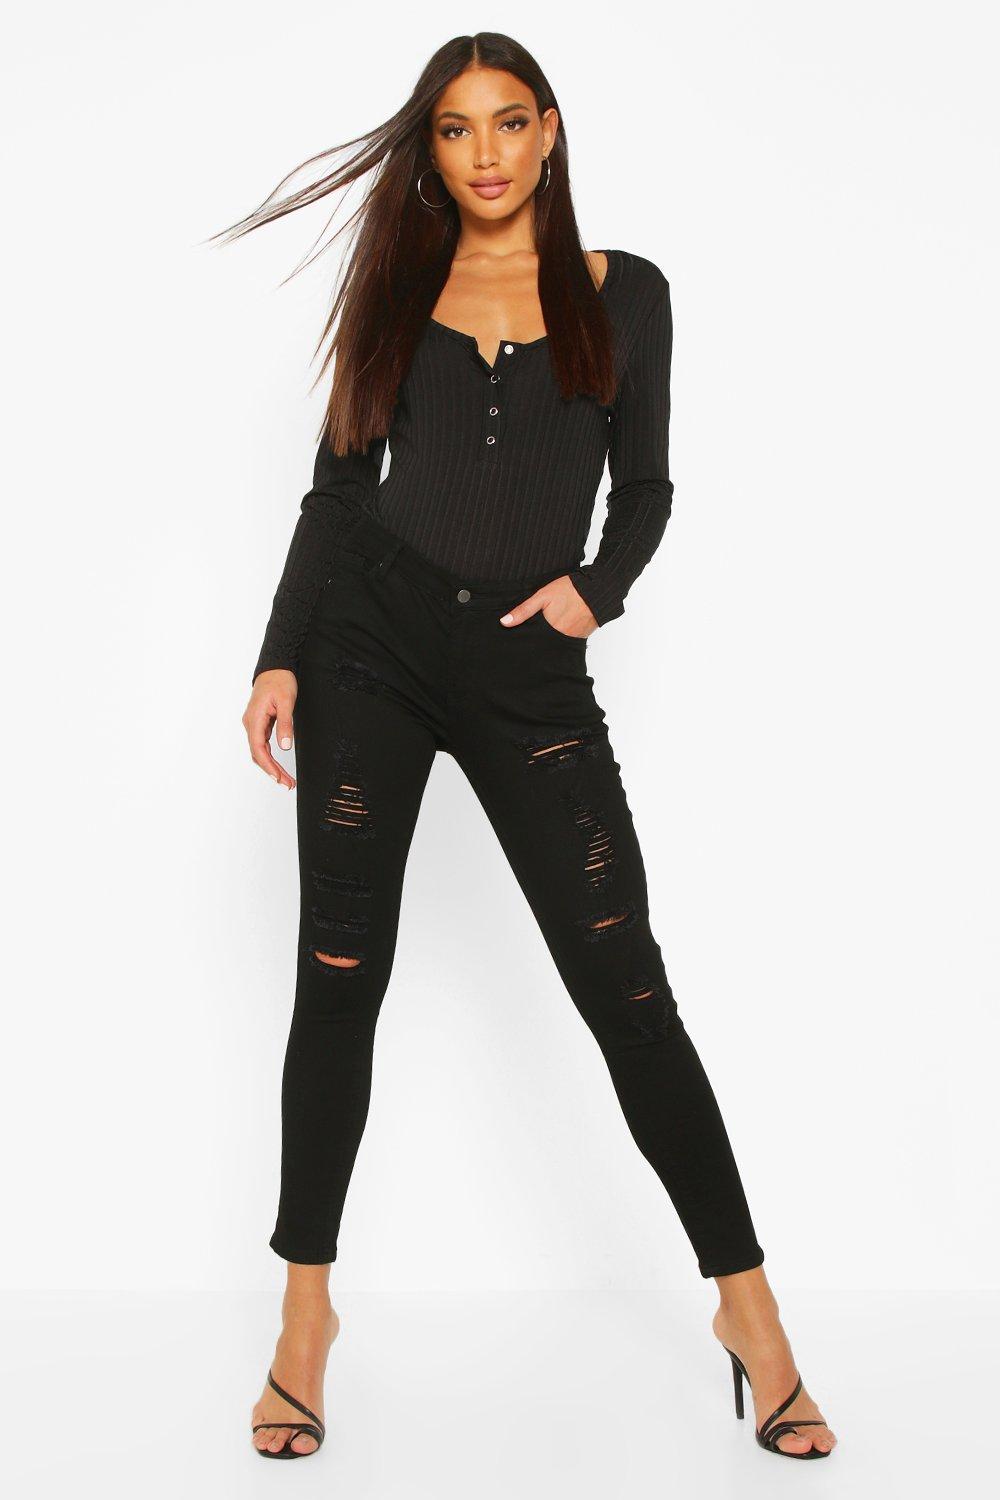 low rise distressed skinny jeans